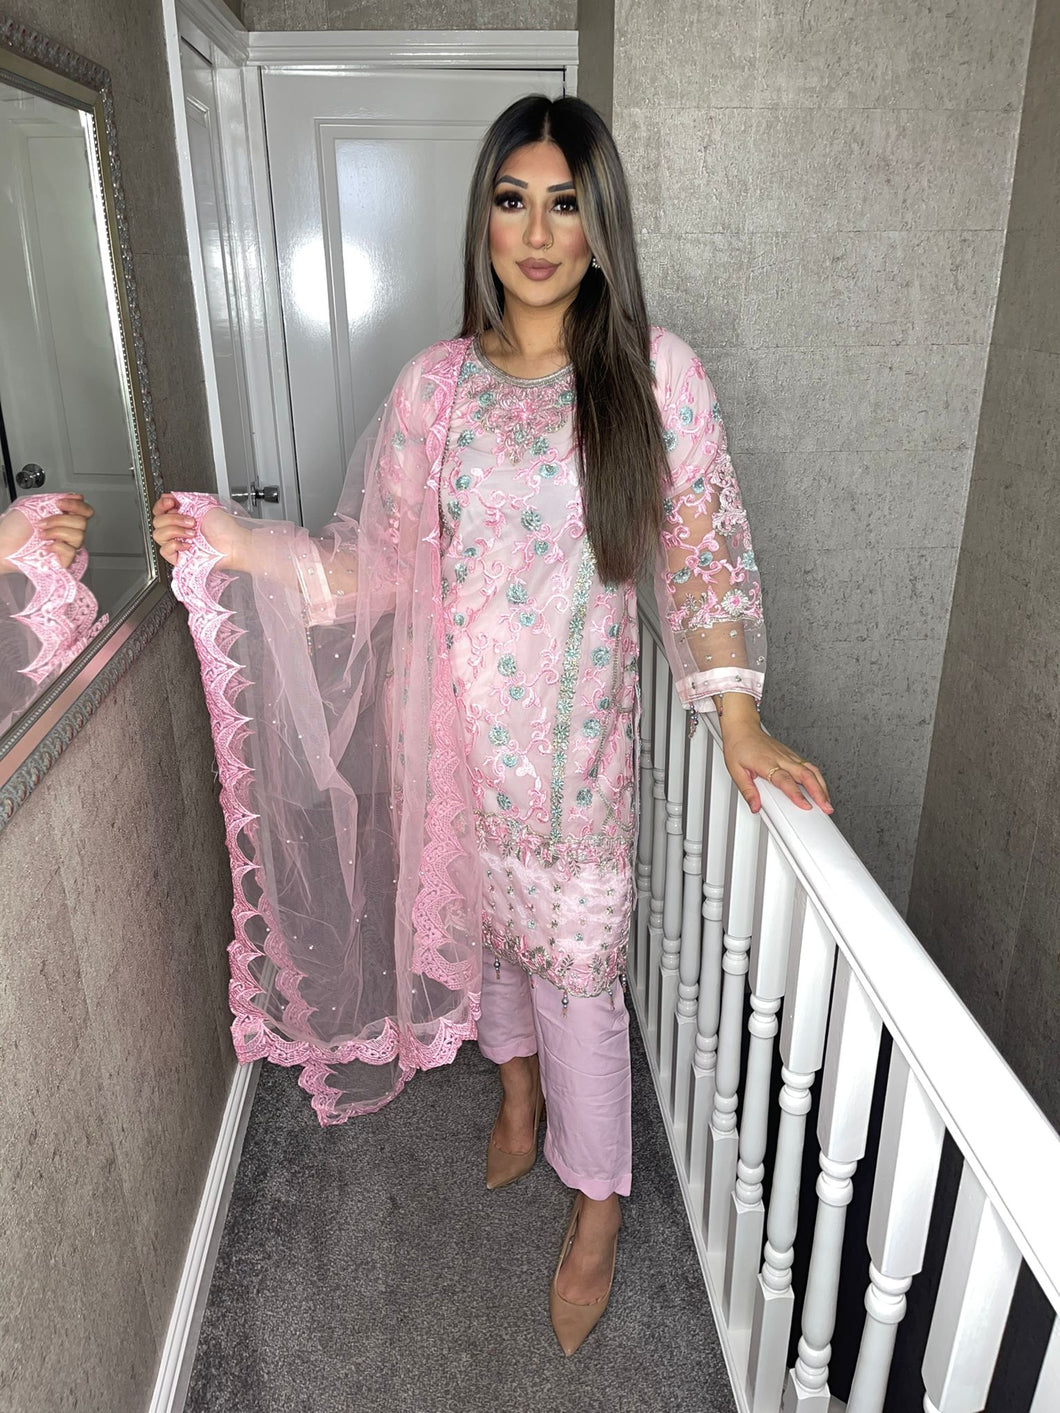 3pc PINK Embroidered Shalwar Kameez with Net dupatta Stitched Suit Ready to wear GC-PINK